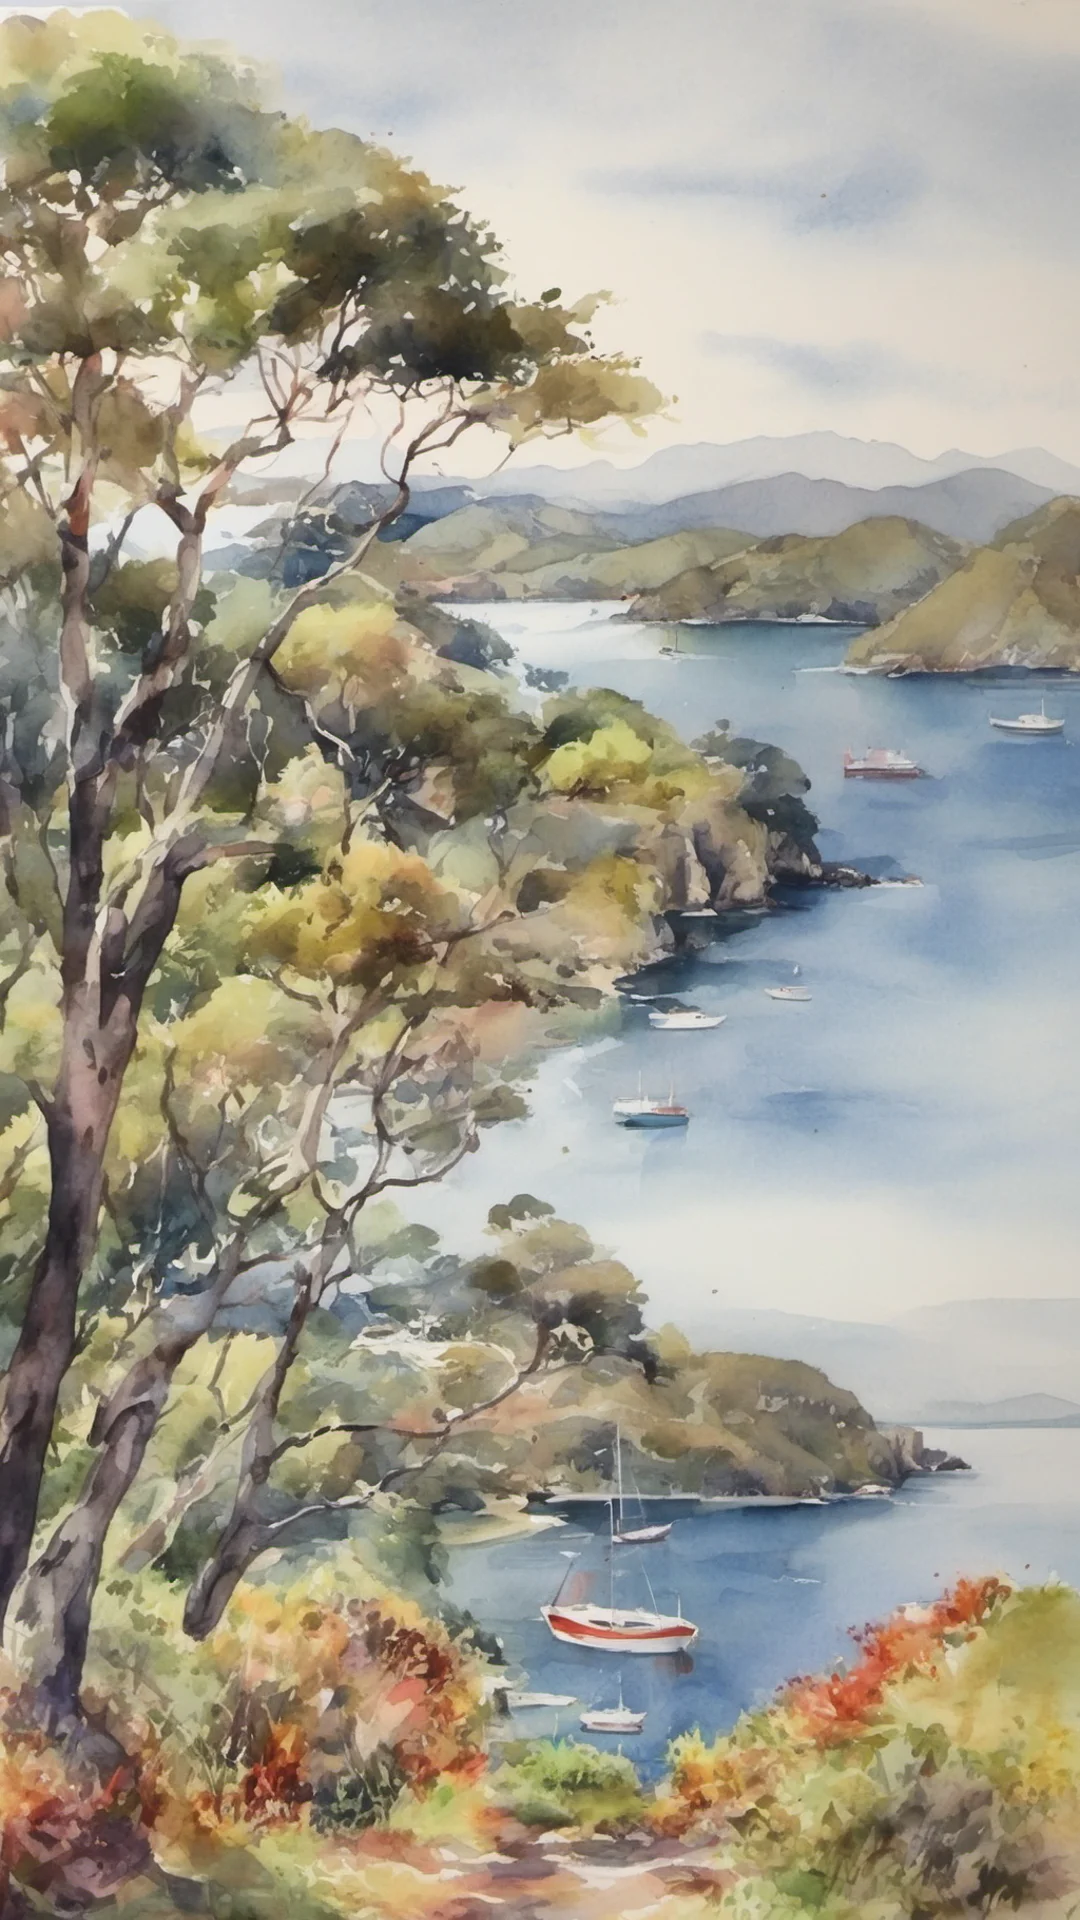 aipicturesque landscape watercolor beautiful colorful tones bay of islands grace stunning amazing awesome portrait 2 tall